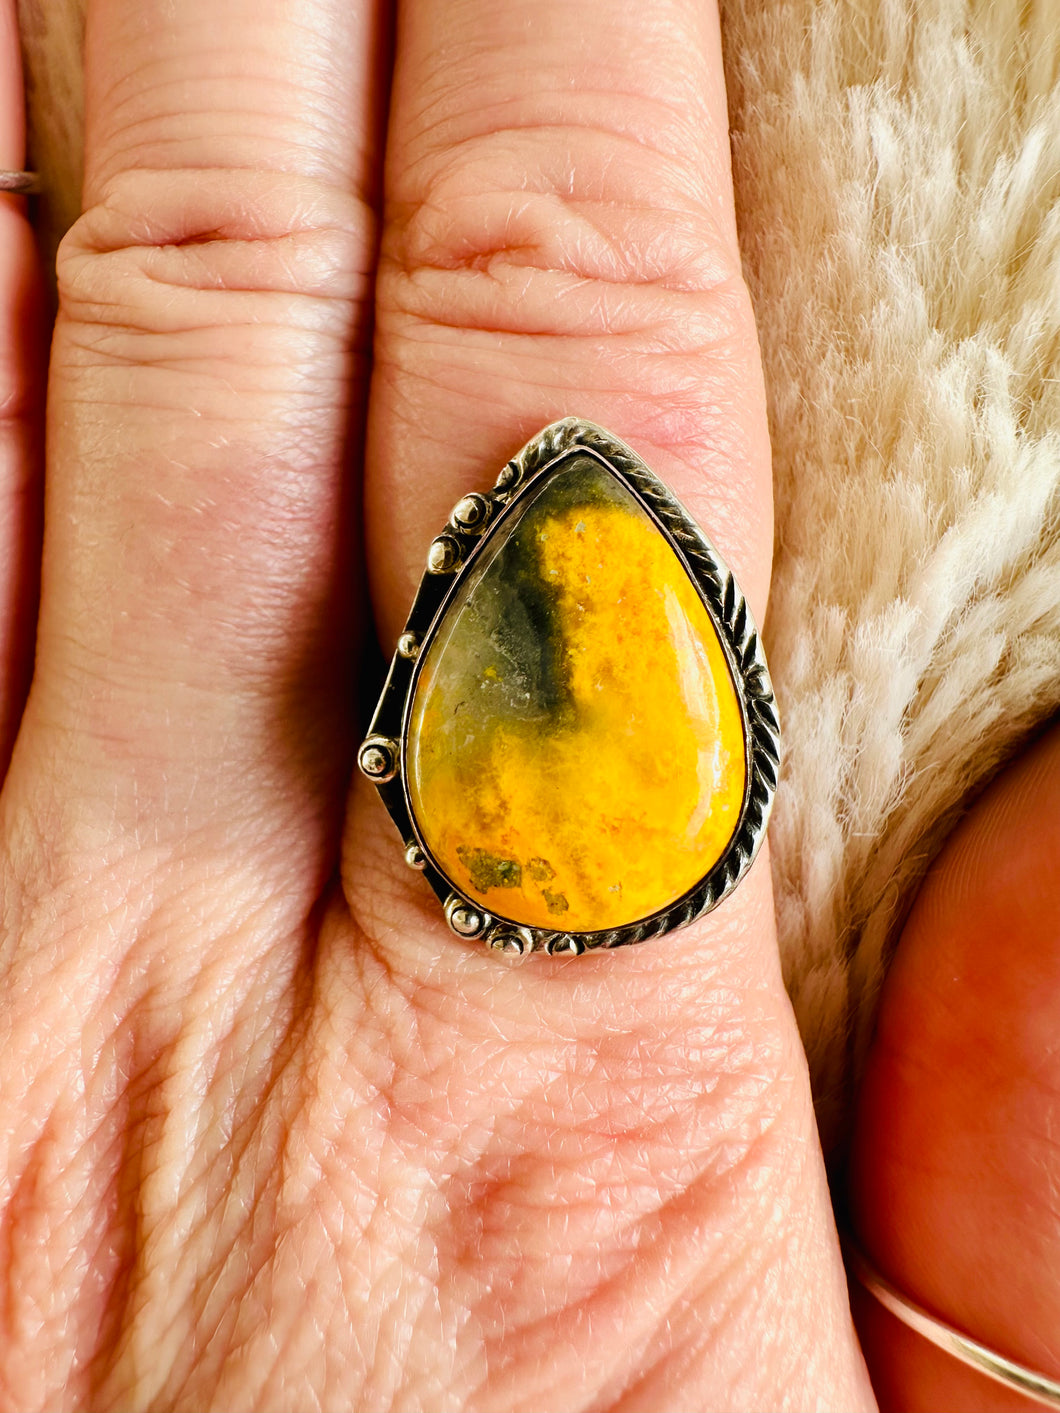 Handmade & Sterling Silver Rings Collection - Bumblebee Jasper